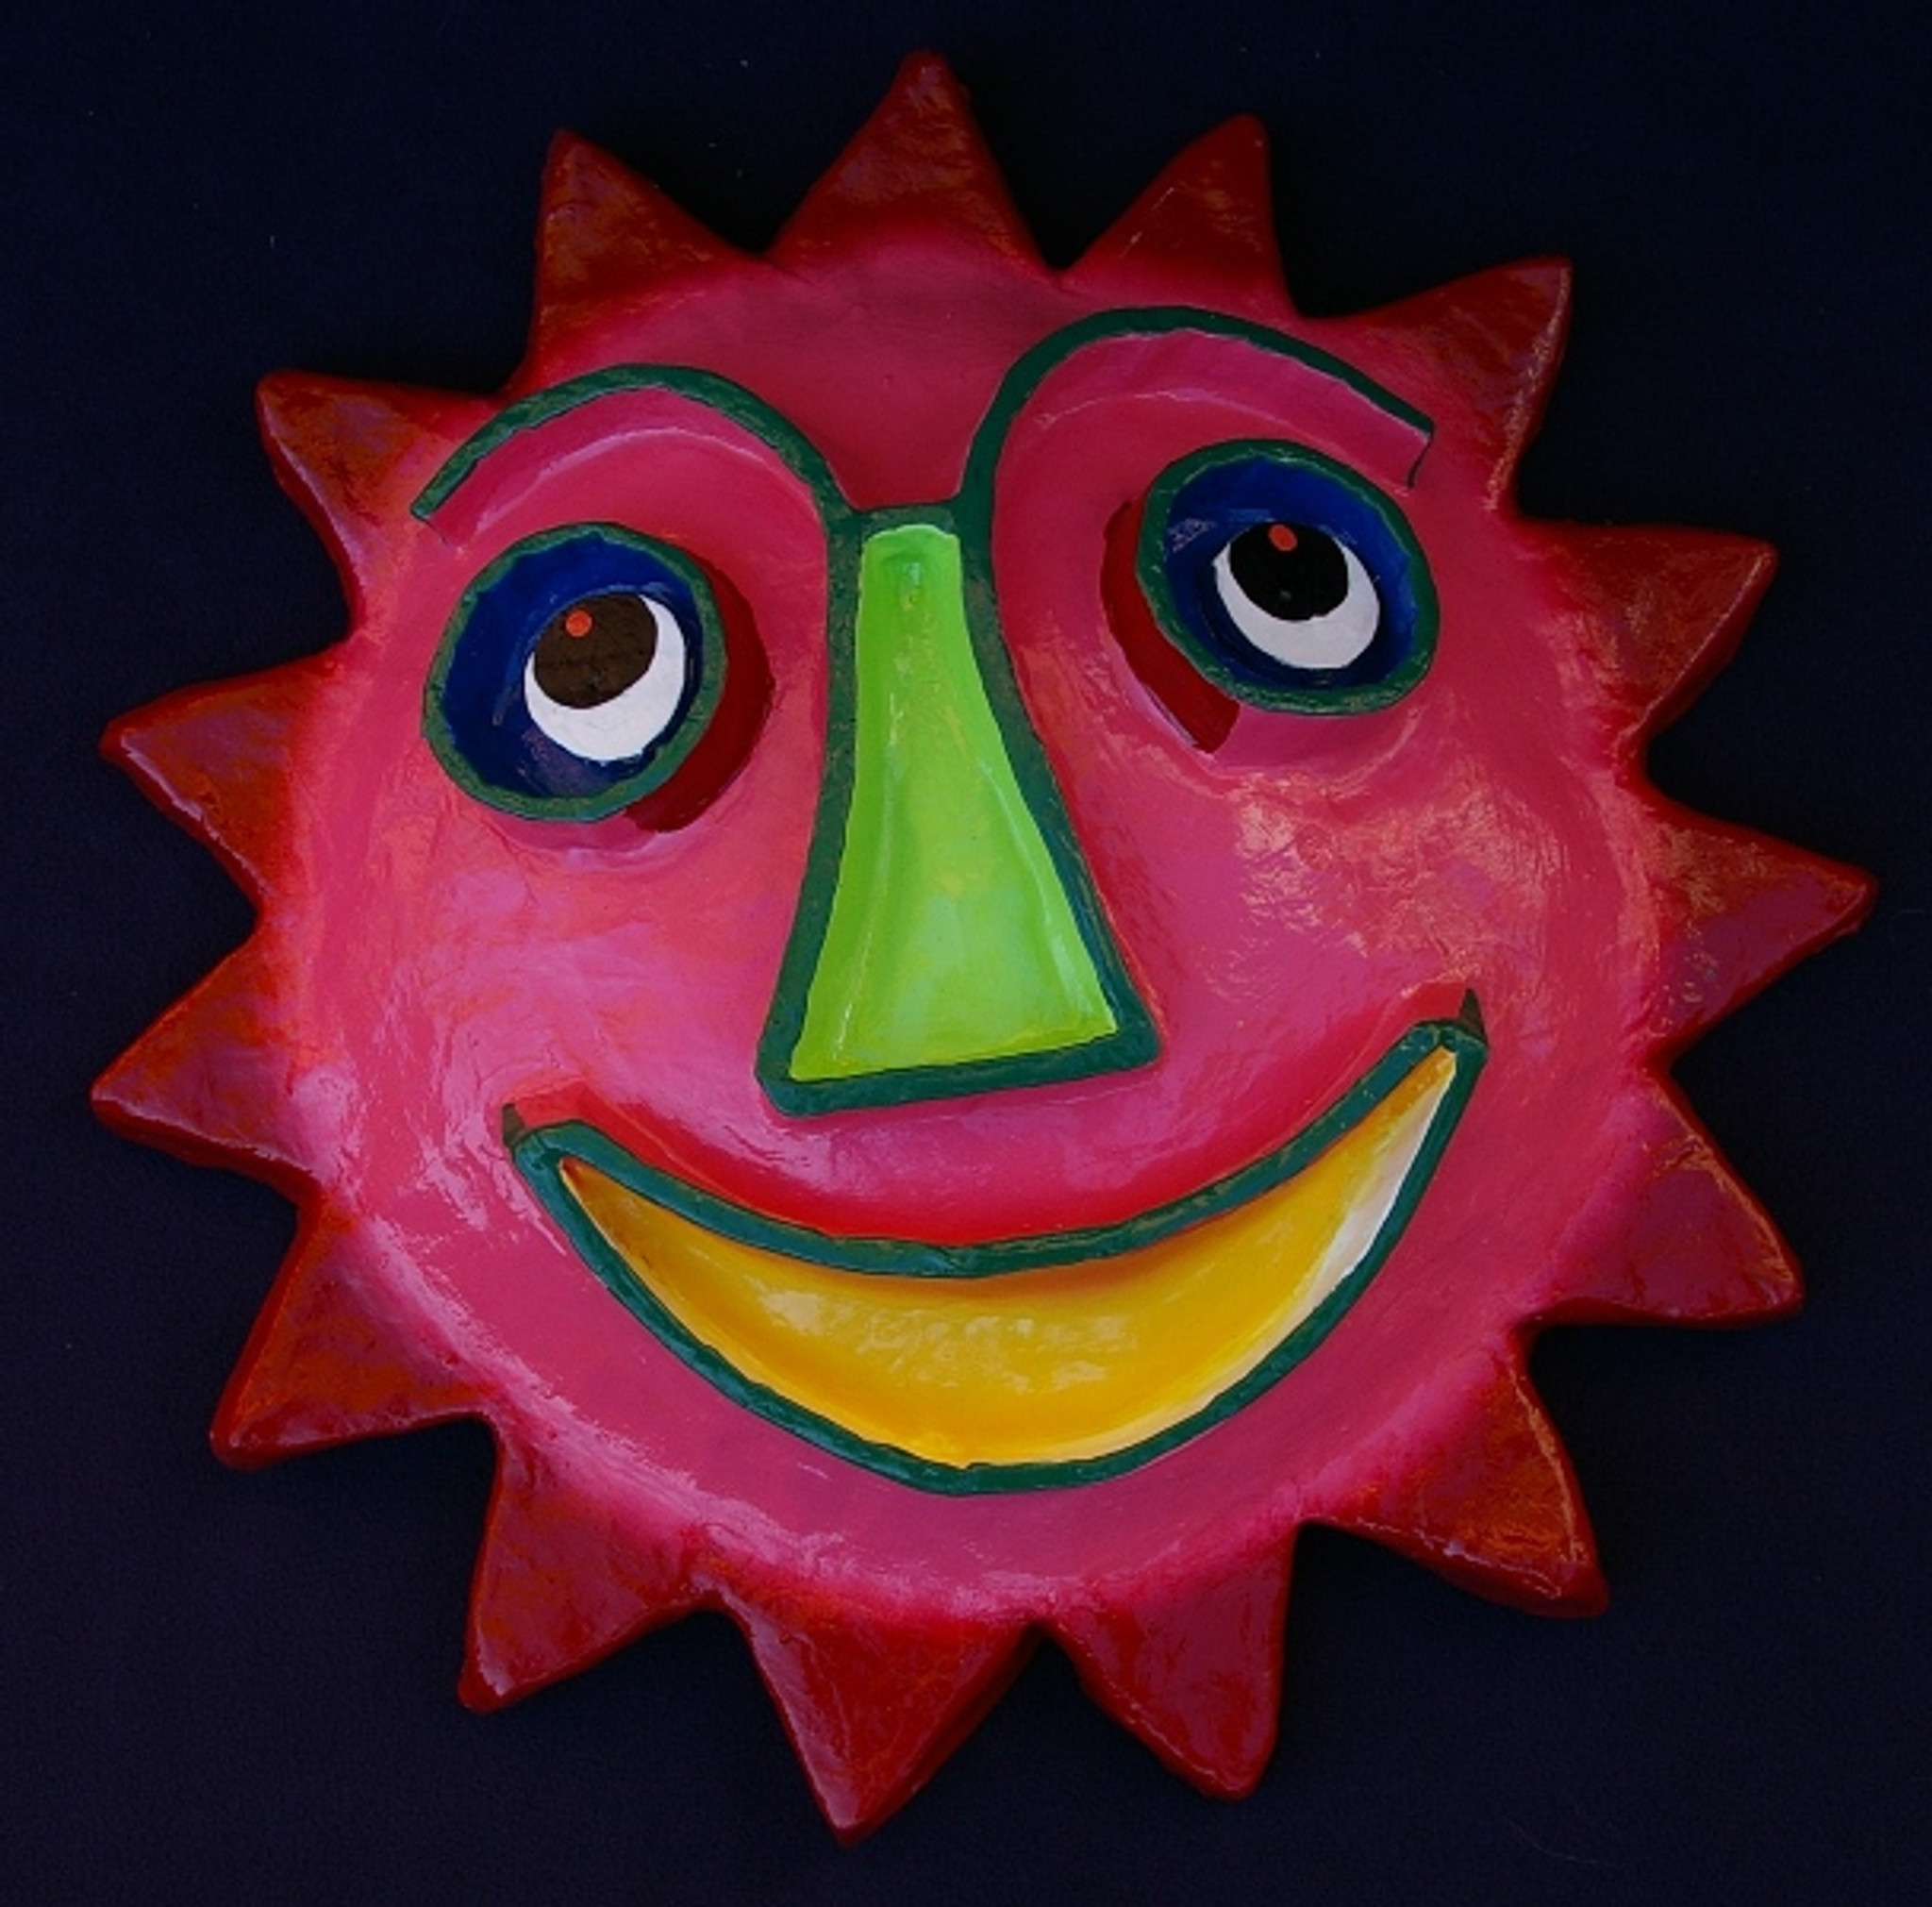 paper mache sun face, hand made in haiti, fairtrade folkart, recycled  cement bags, bright whimsicle happy